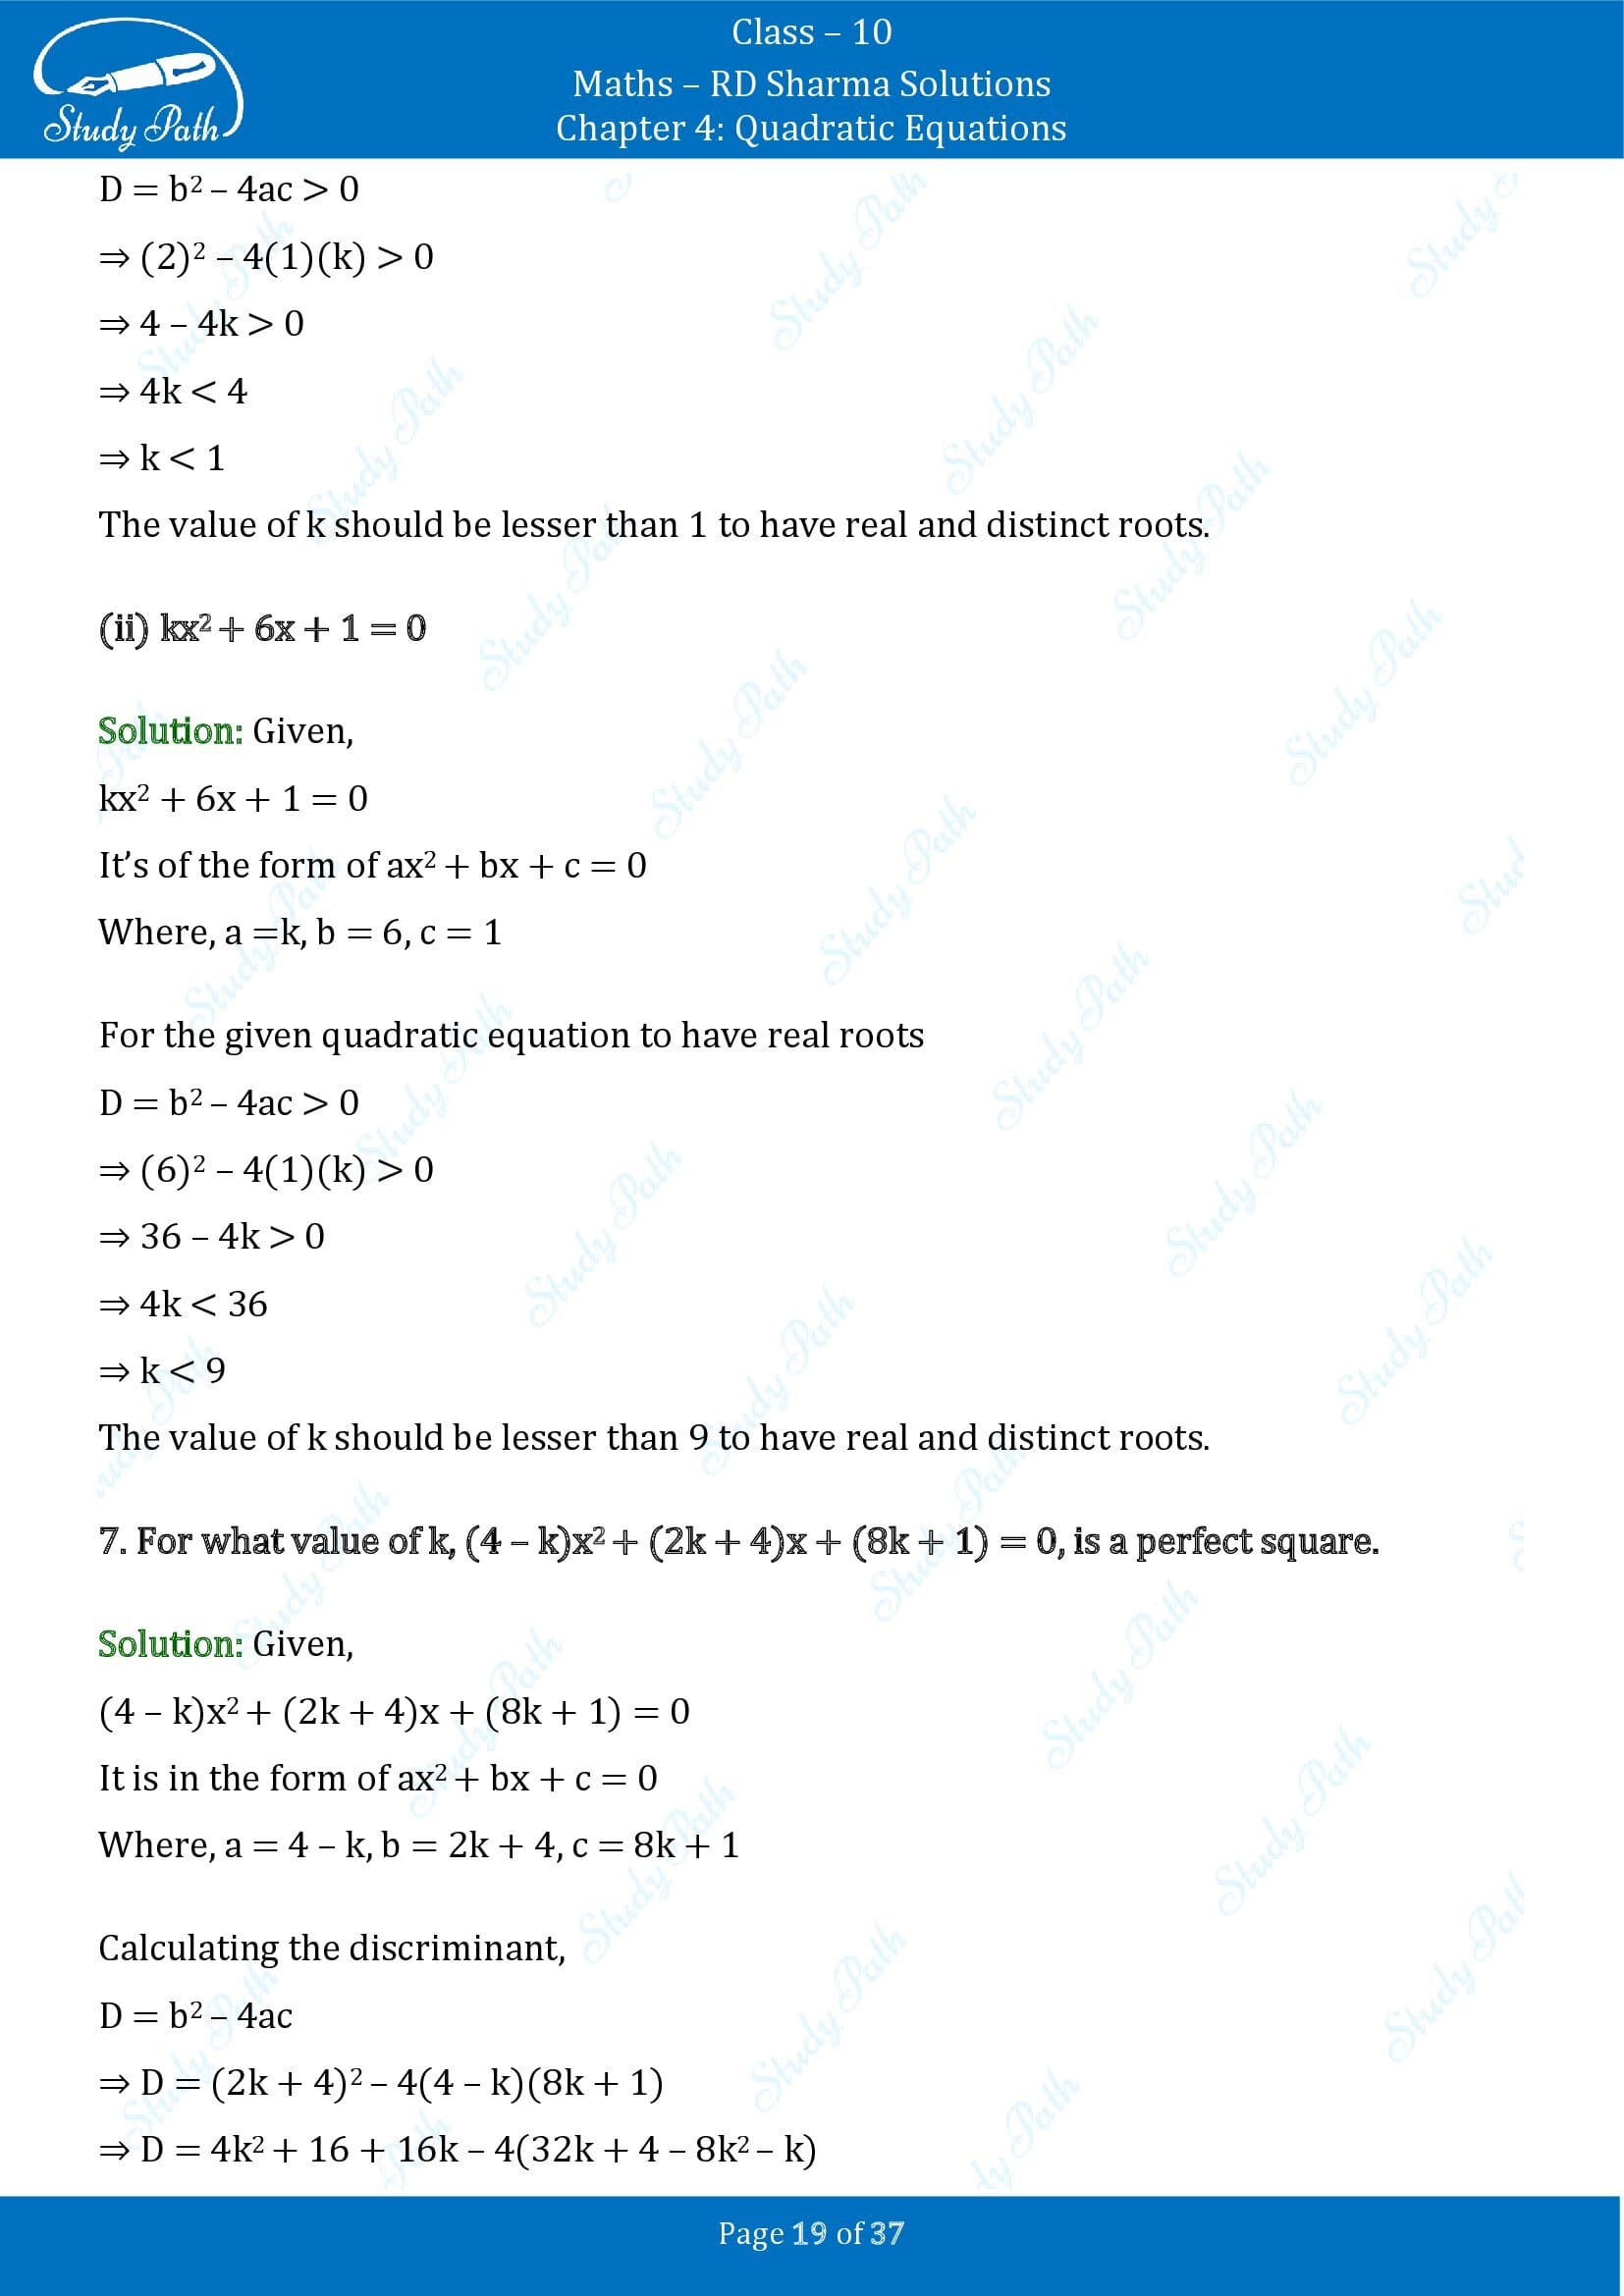 RD Sharma Solutions Class 10 Chapter 4 Quadratic Equations Exercise 4.6 00019